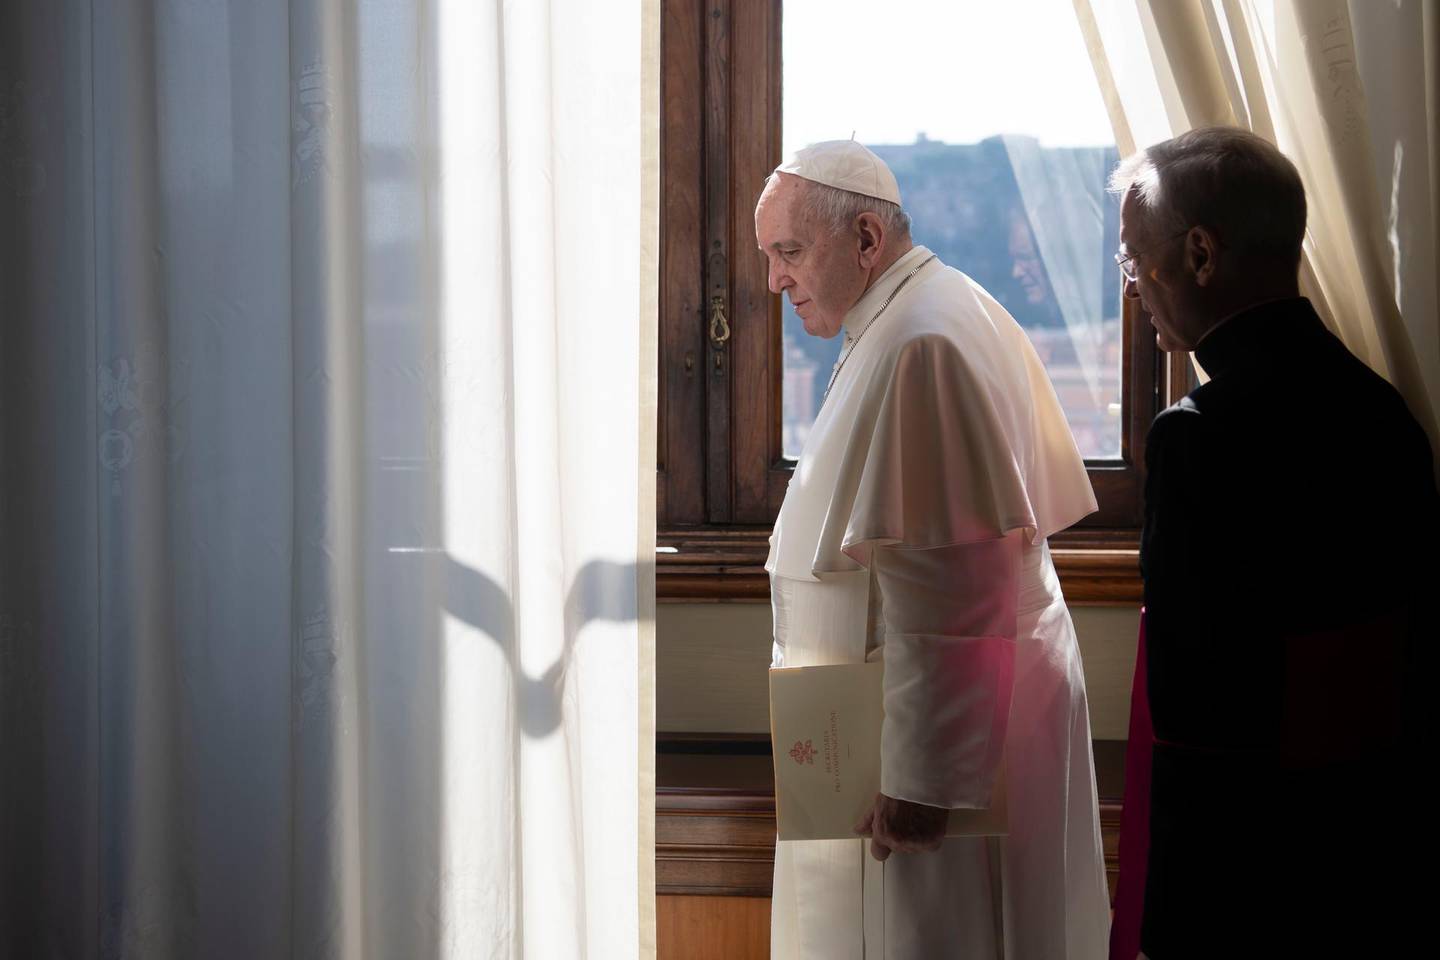 Pope Francis leaves after his weekly general audience at the Vatican, Wednesday, March 18, 2020. For most people, the new coronavirus causes only mild or moderate symptoms. For some it can cause more severe illness, especially in older adults and people with existing health problems. (Vatican News via AP)